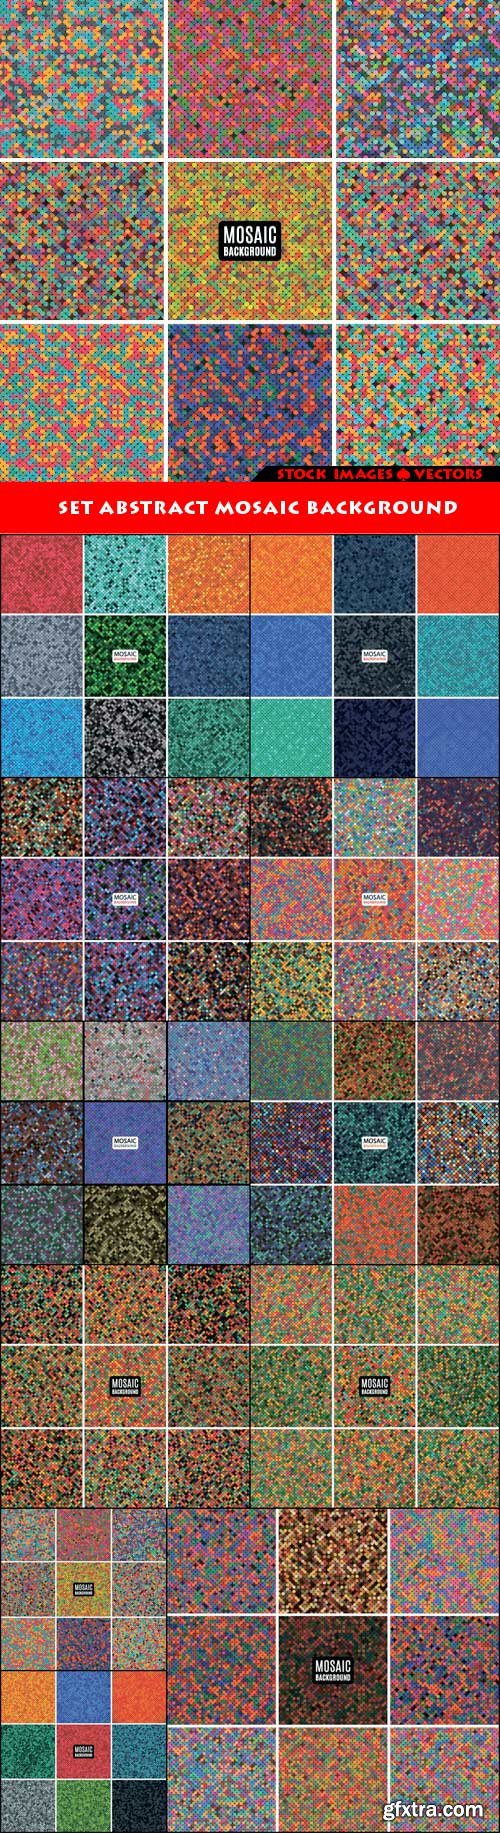 Set abstract mosaic background 11x EPS